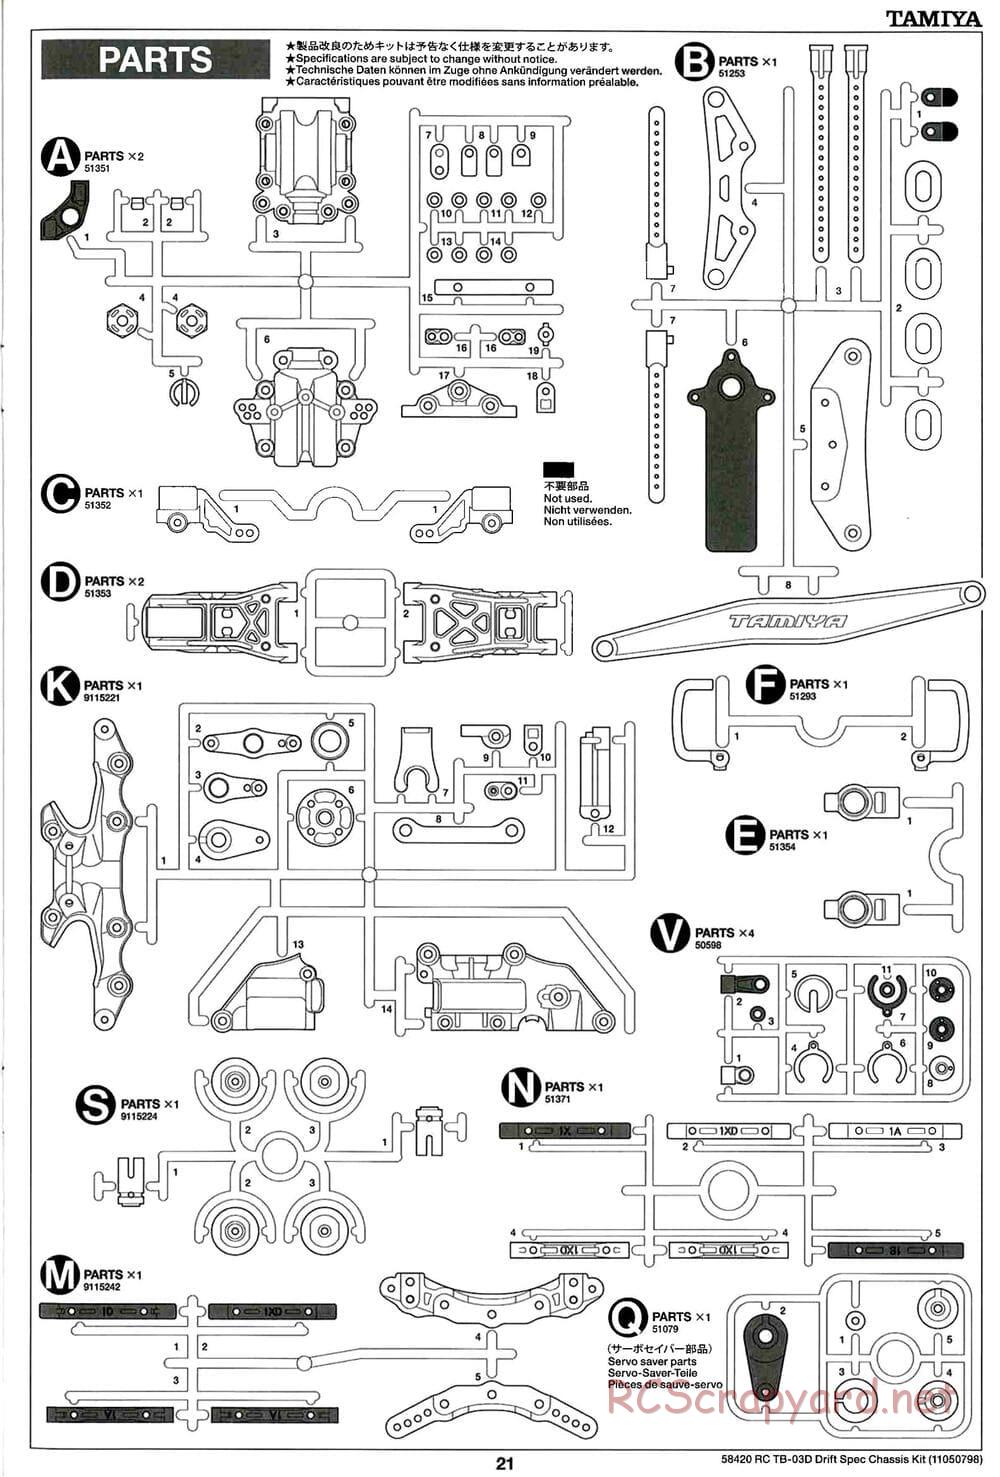 Tamiya - TB-03D HP Drift Spec Chassis - Manual - Page 21